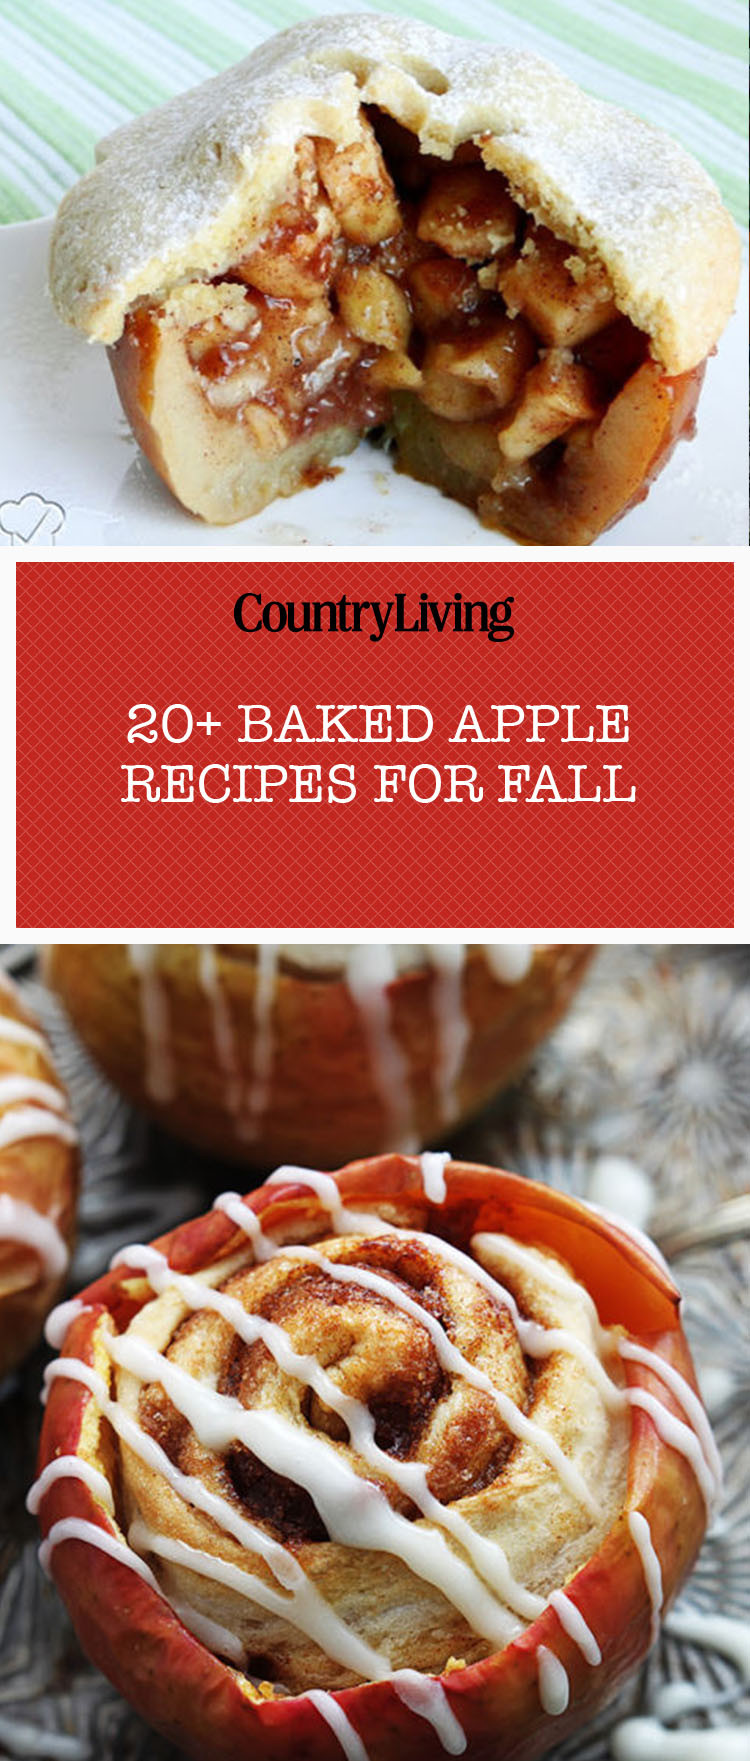 Fall Apple Recipes
 23 Fall Baked Apple Recipes Easy Ideas for Stuffed Apples